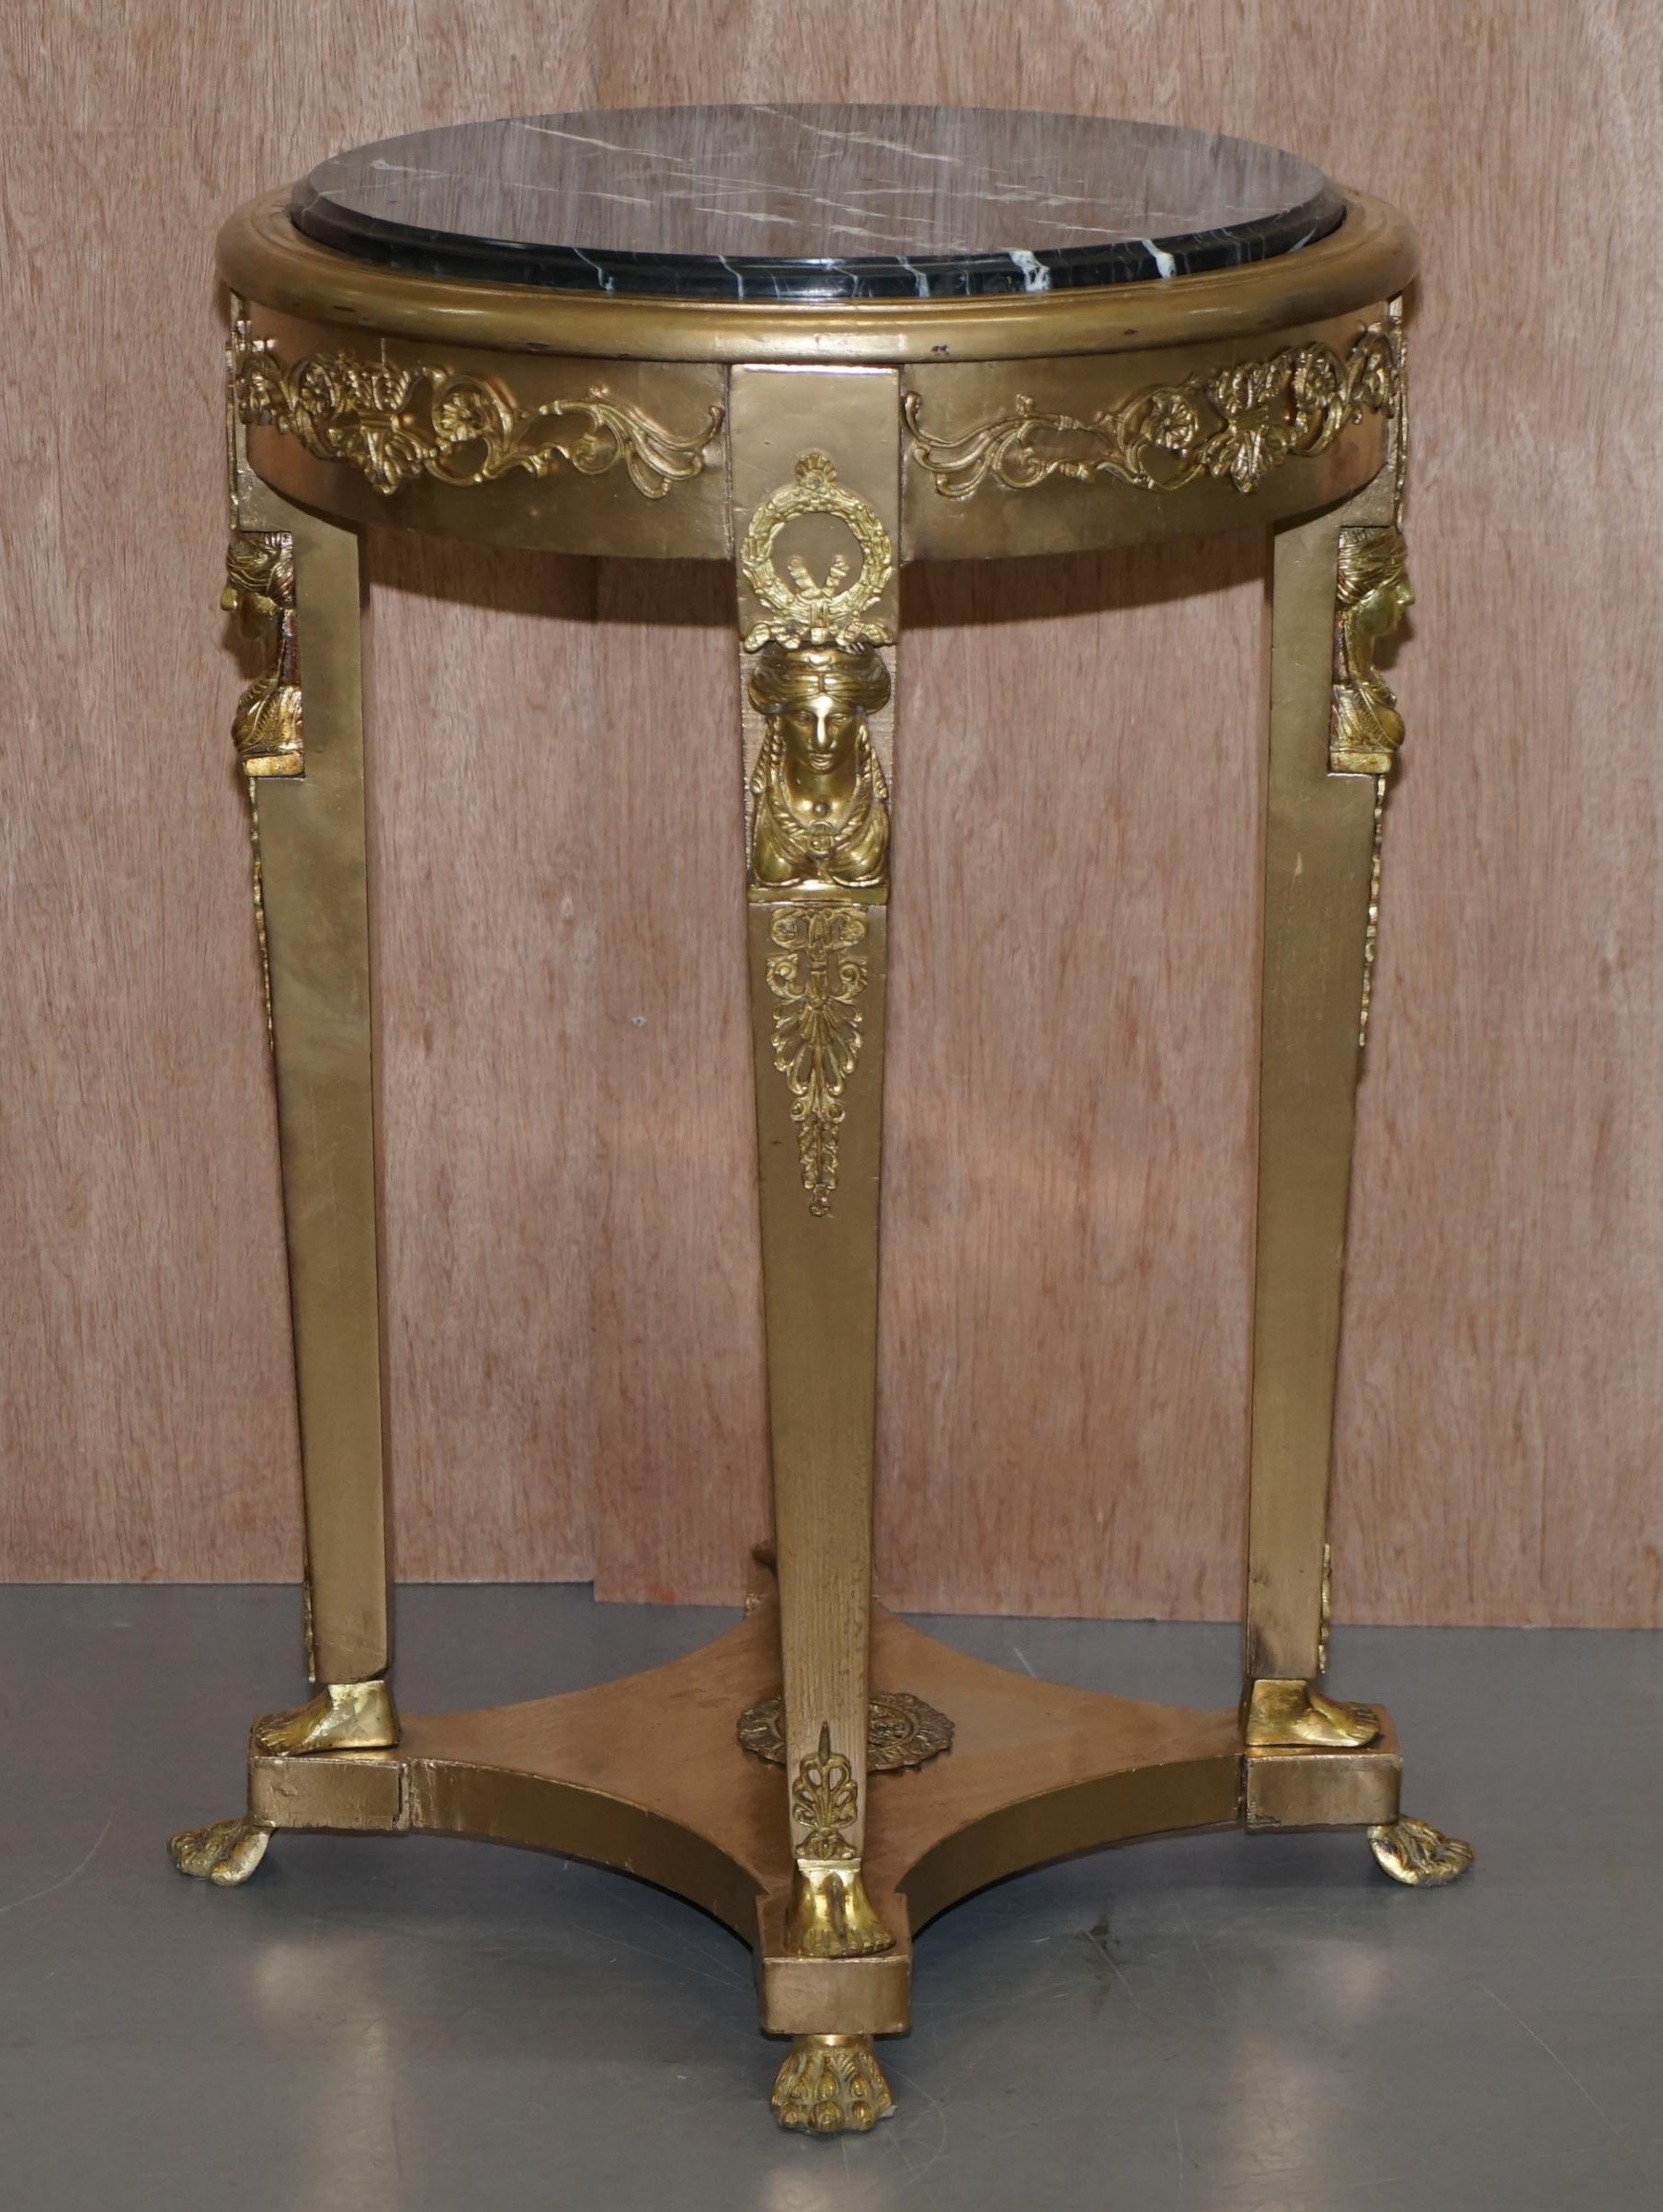 We are delighted to offer for sale this lovely pair of French Empire style gold giltwood with marble tops Jardine stands

A very good looking and decorative pair, original designed in the smaller context for plants, they can of course be used for